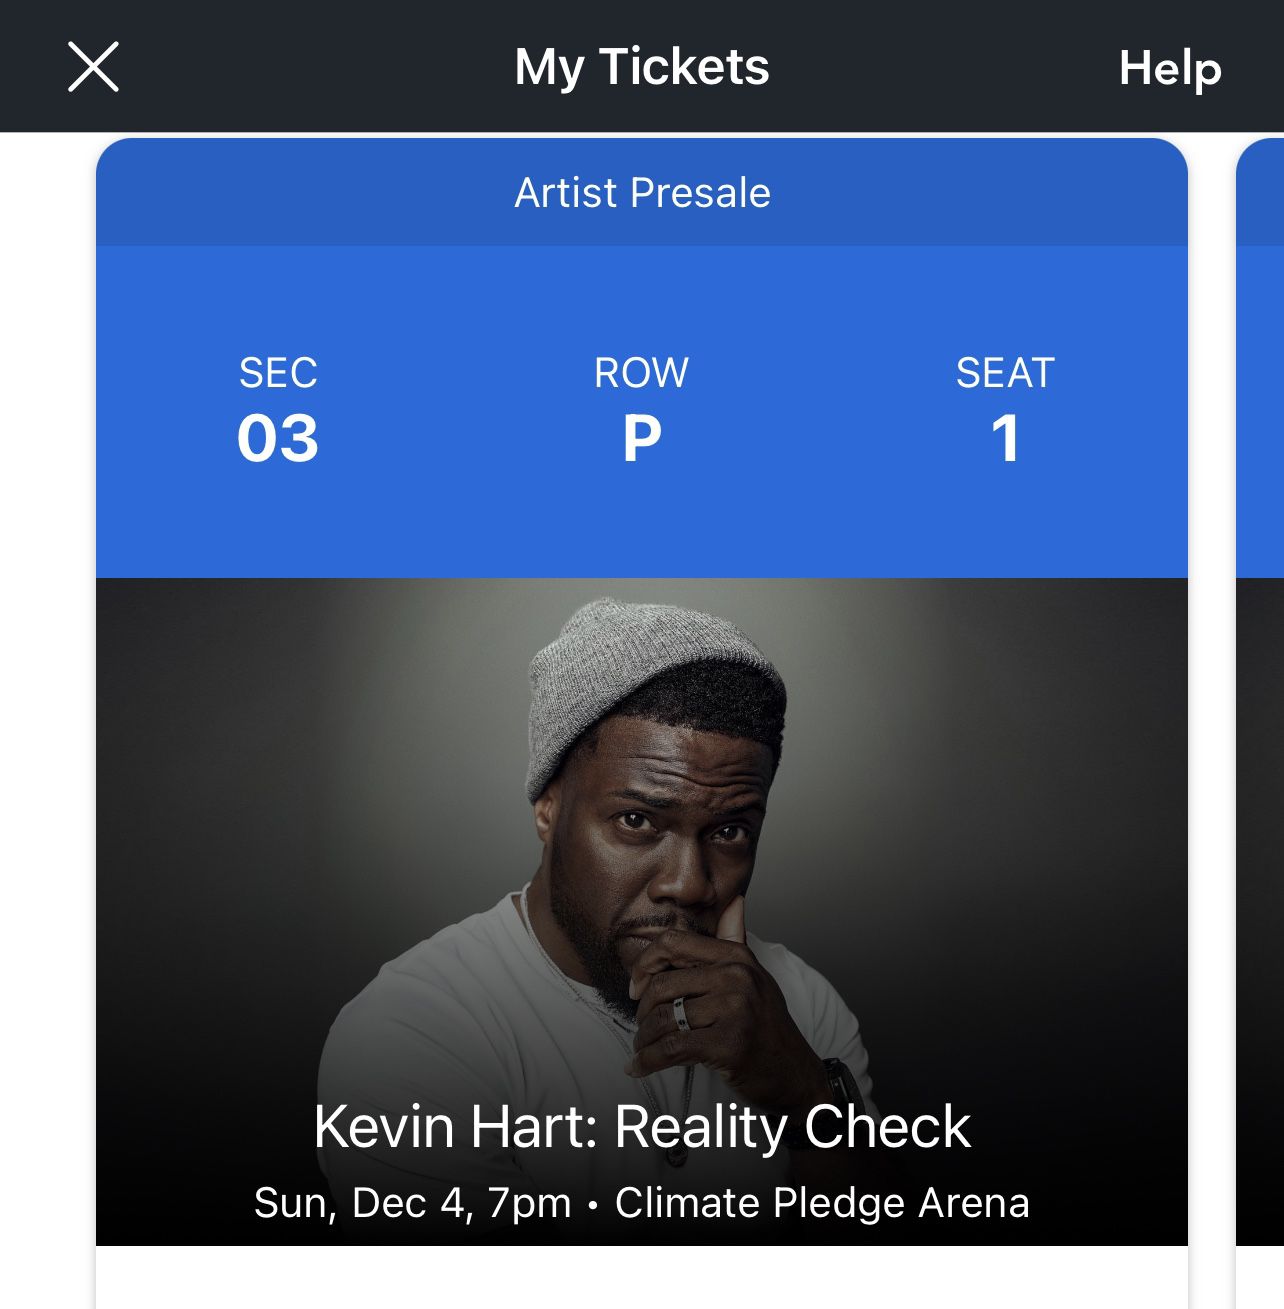 Kevin Hart - Sunday Dec 4 Section 3- On Vacation, Can’t Go!! 😭